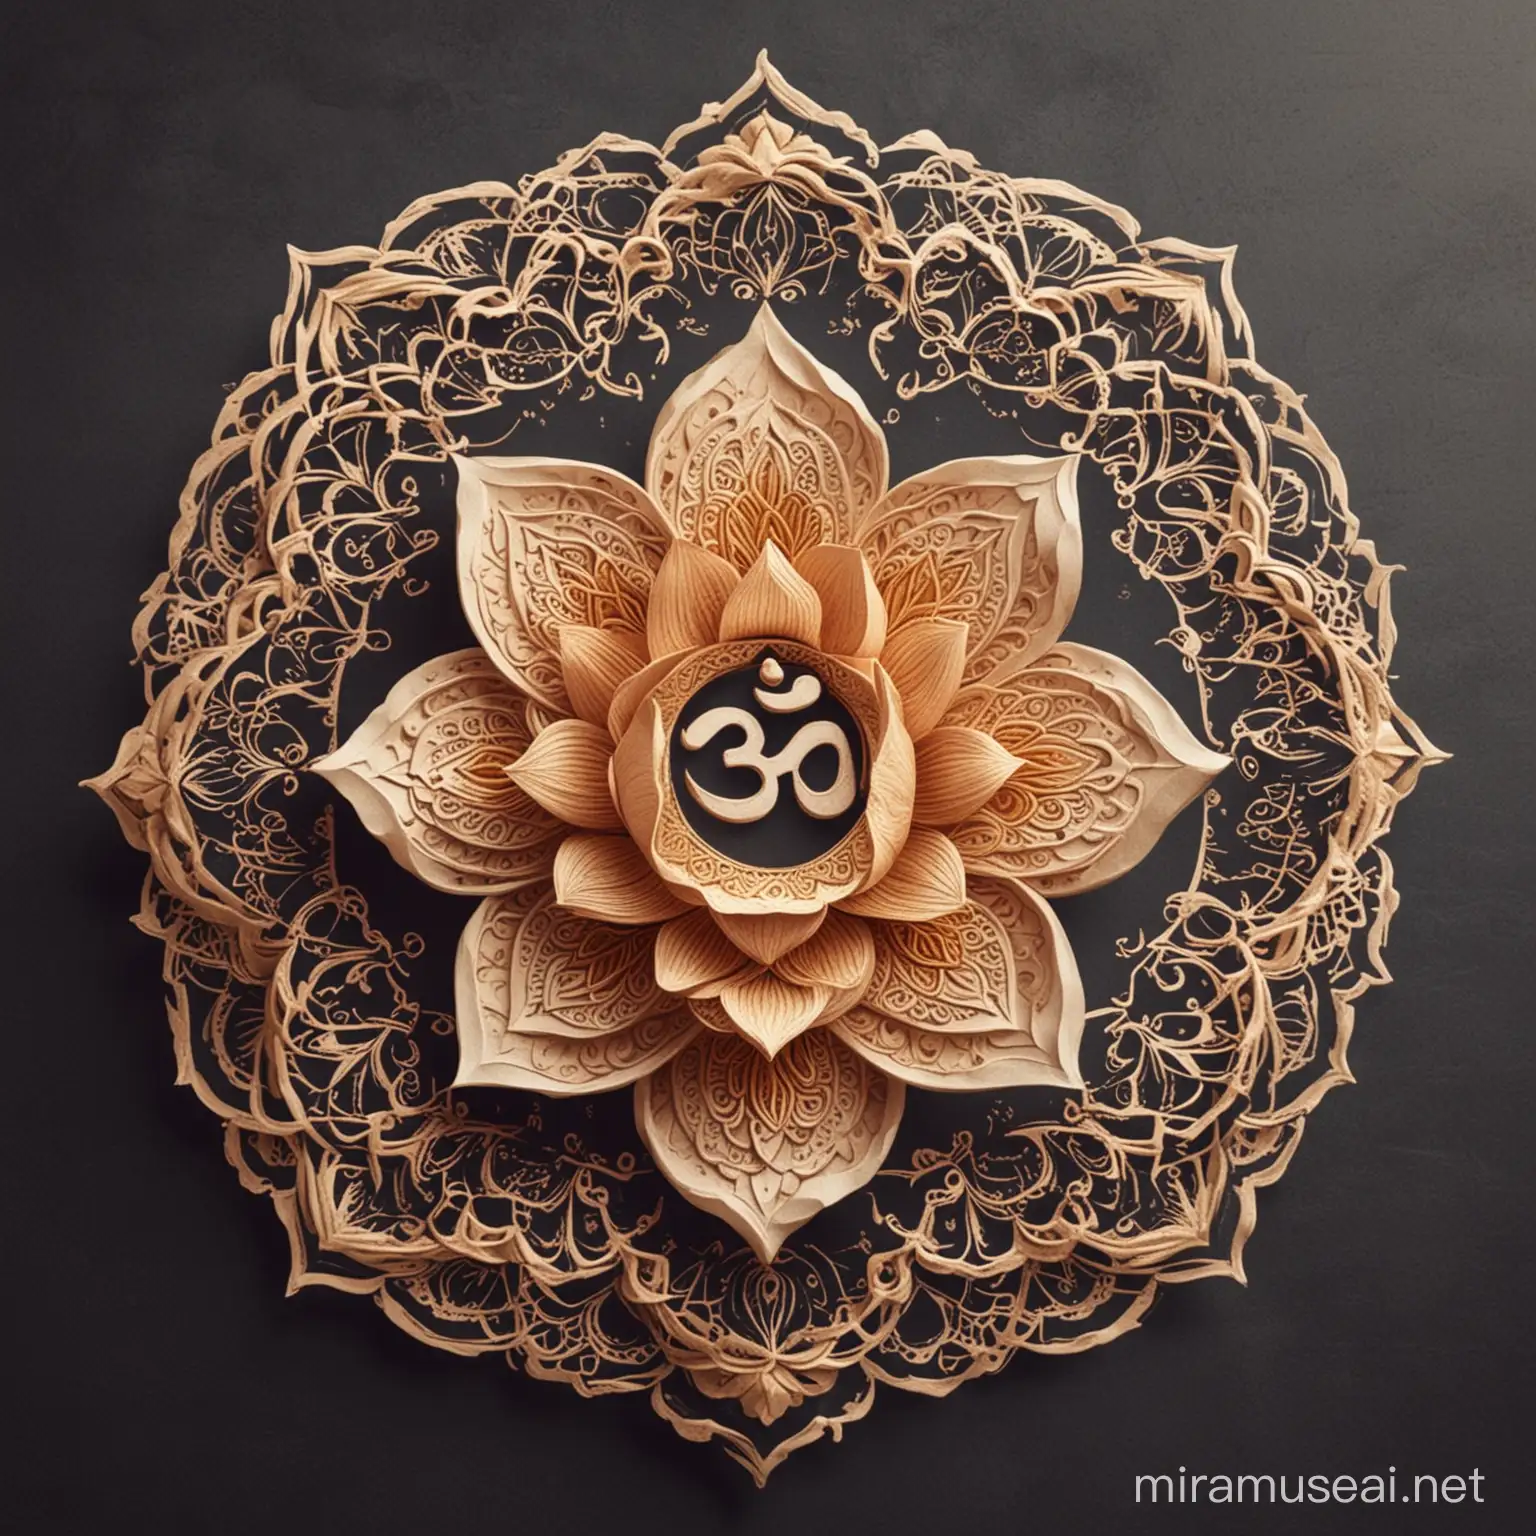 Theme: Ancient Wisdom, Perspective, Insight
Style: Elegant, Spiritual, Timeless
Elements: Incorporate symbolic representations of Hinduism (e.g., lotus, Om symbol, mandala) with a modern twist. make a logo for this